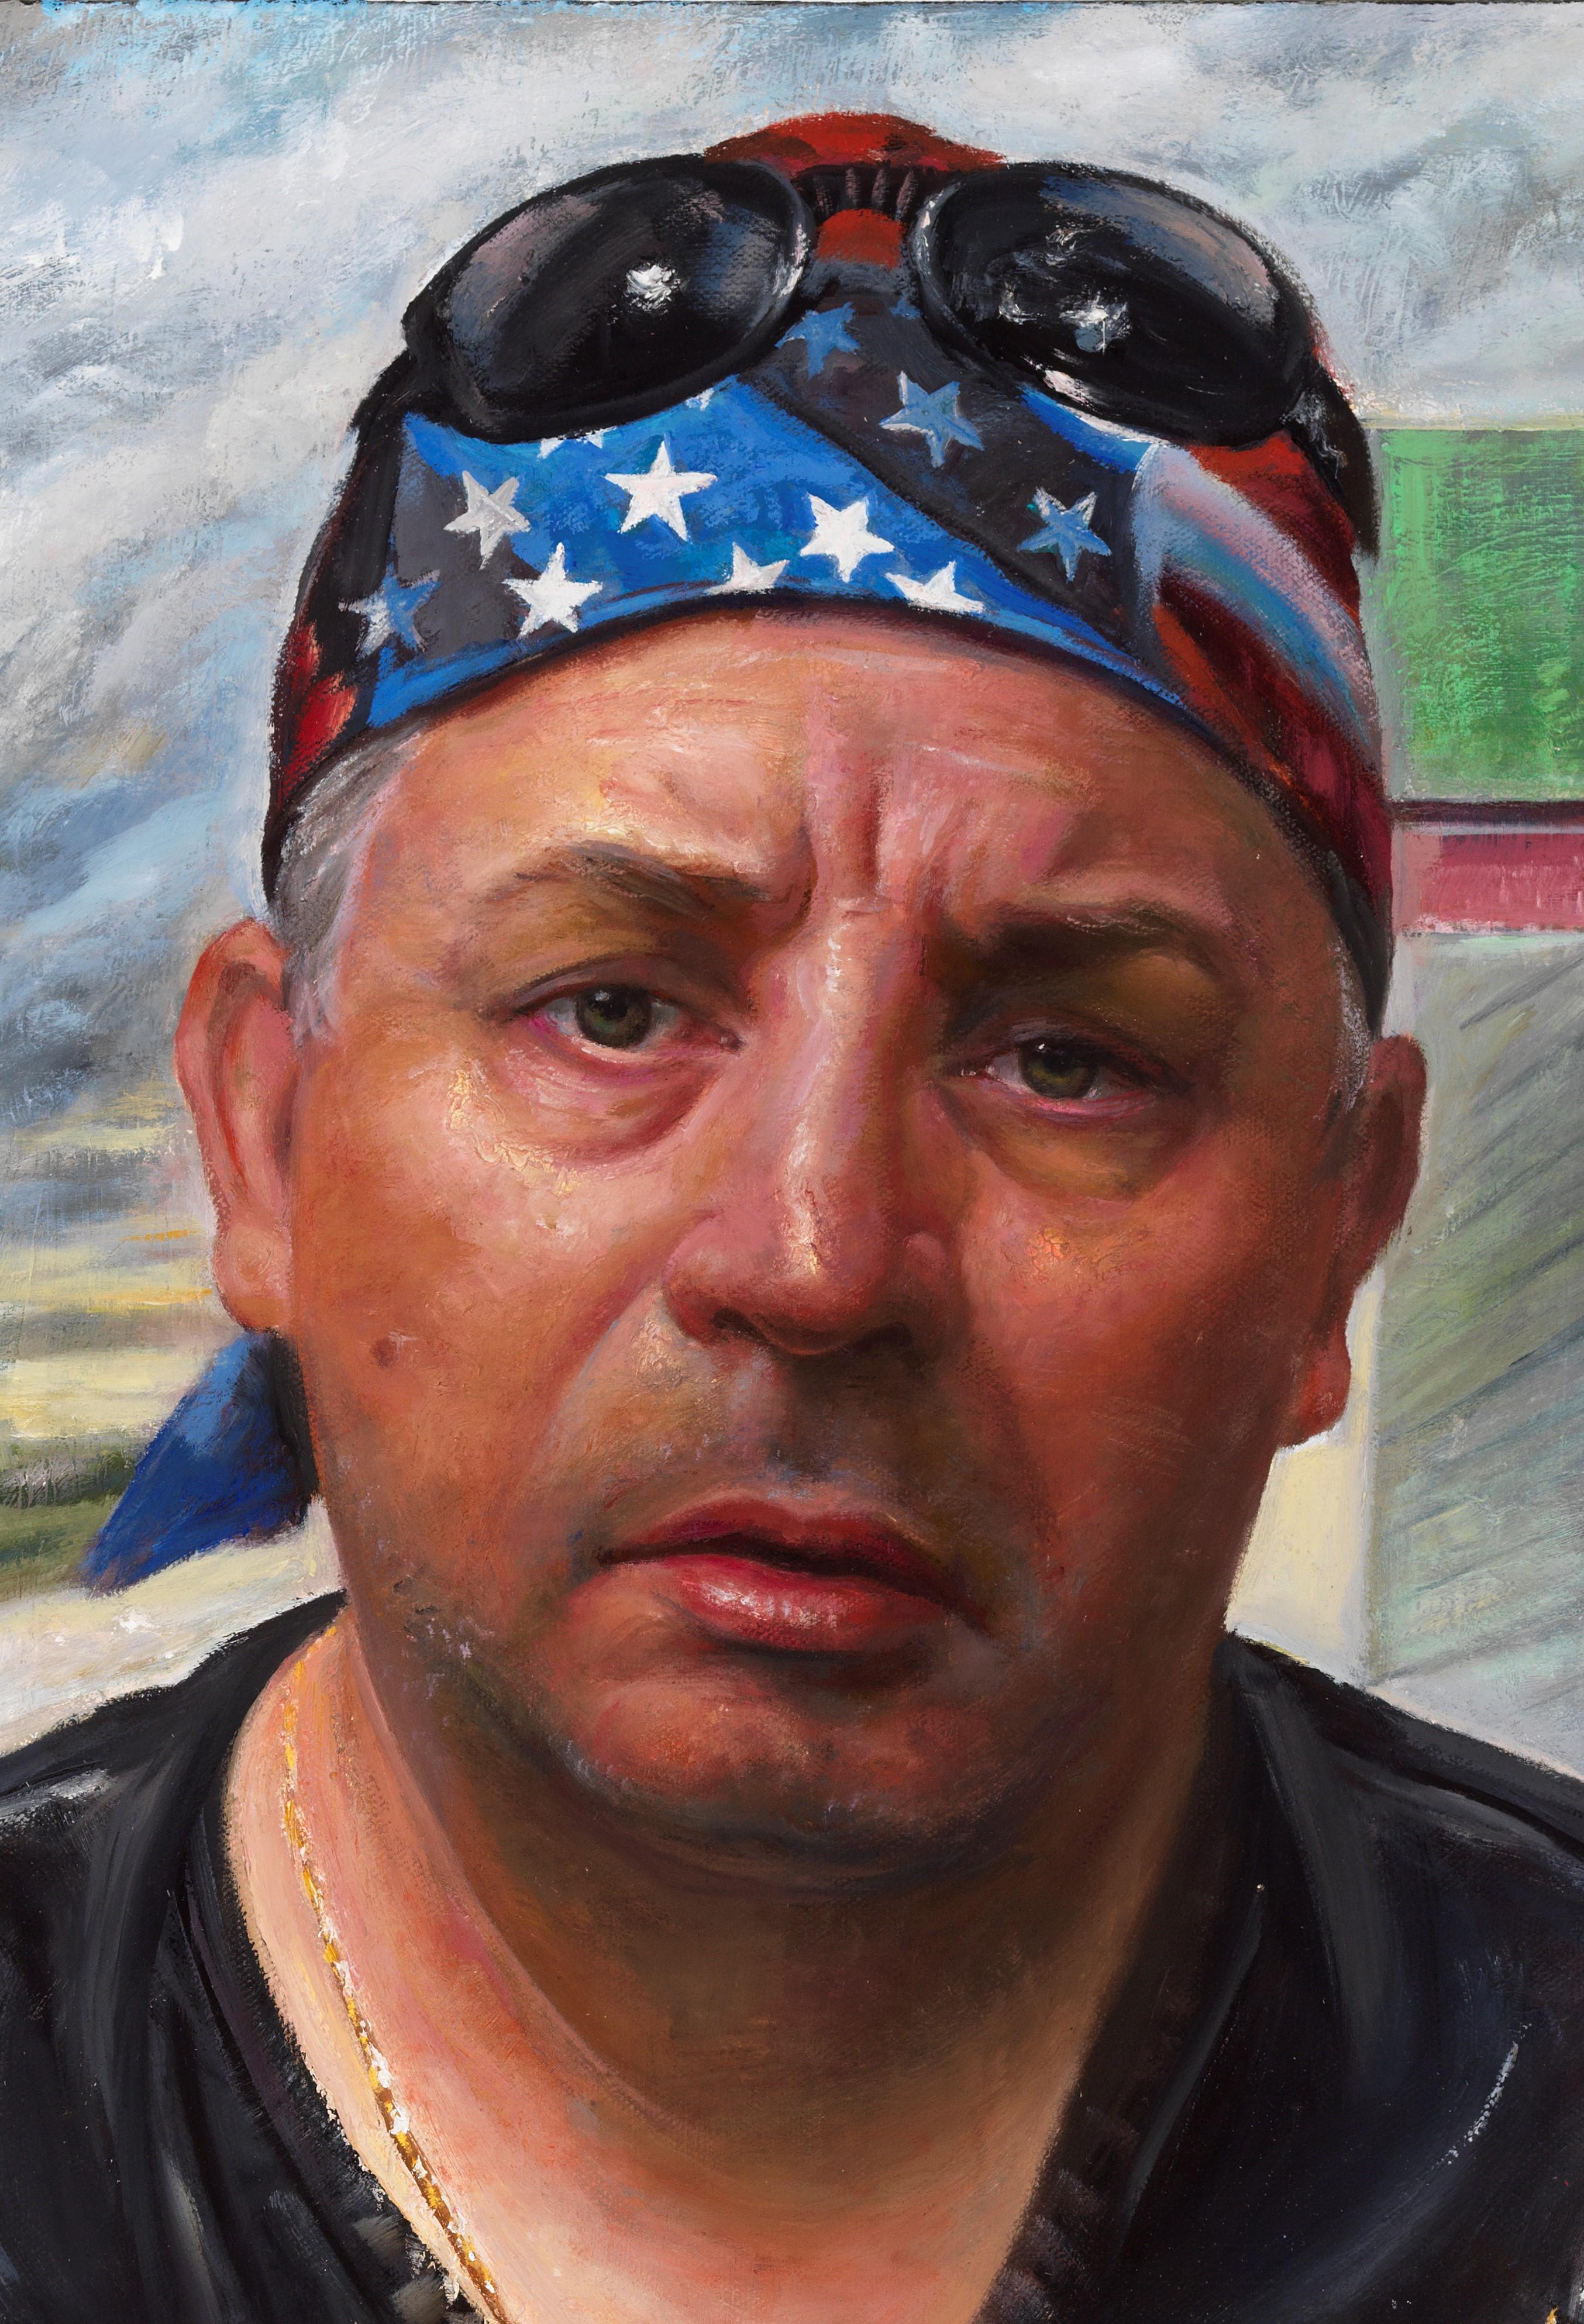 Is A Storm Coming? - Portrait of a Tattooed Biker, Original Oil on Canvas - Painting by Bruno Surdo